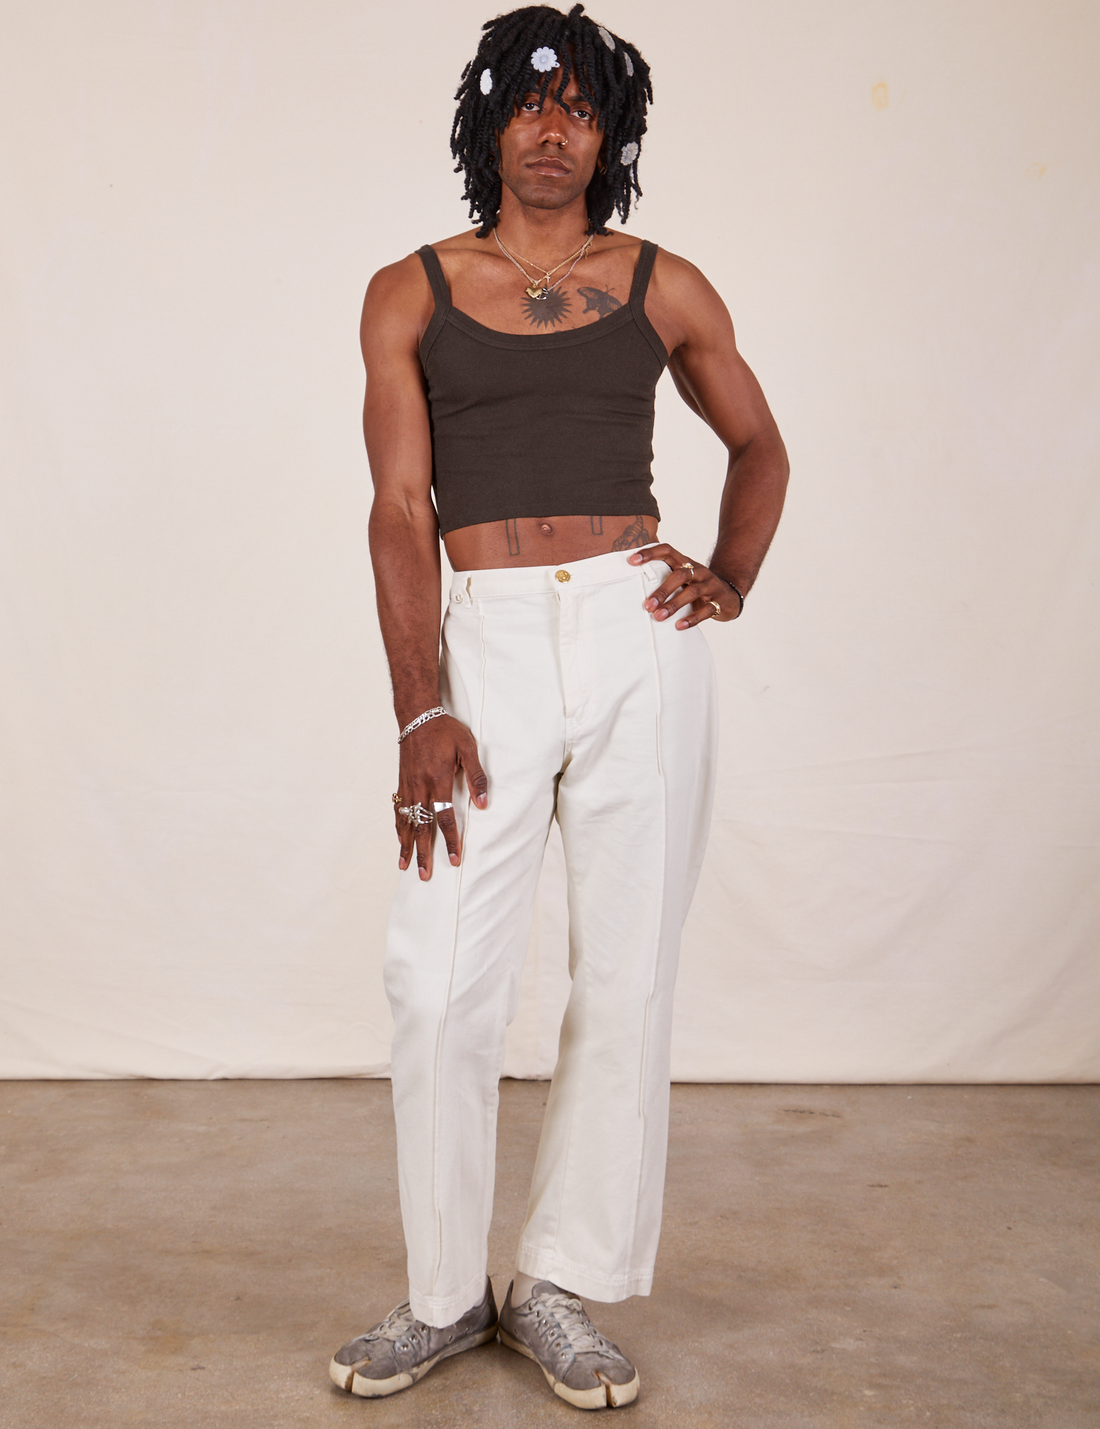 Jerrod is wearing Cropped Cami in Espresso Brown and vintage off-white Western Pants